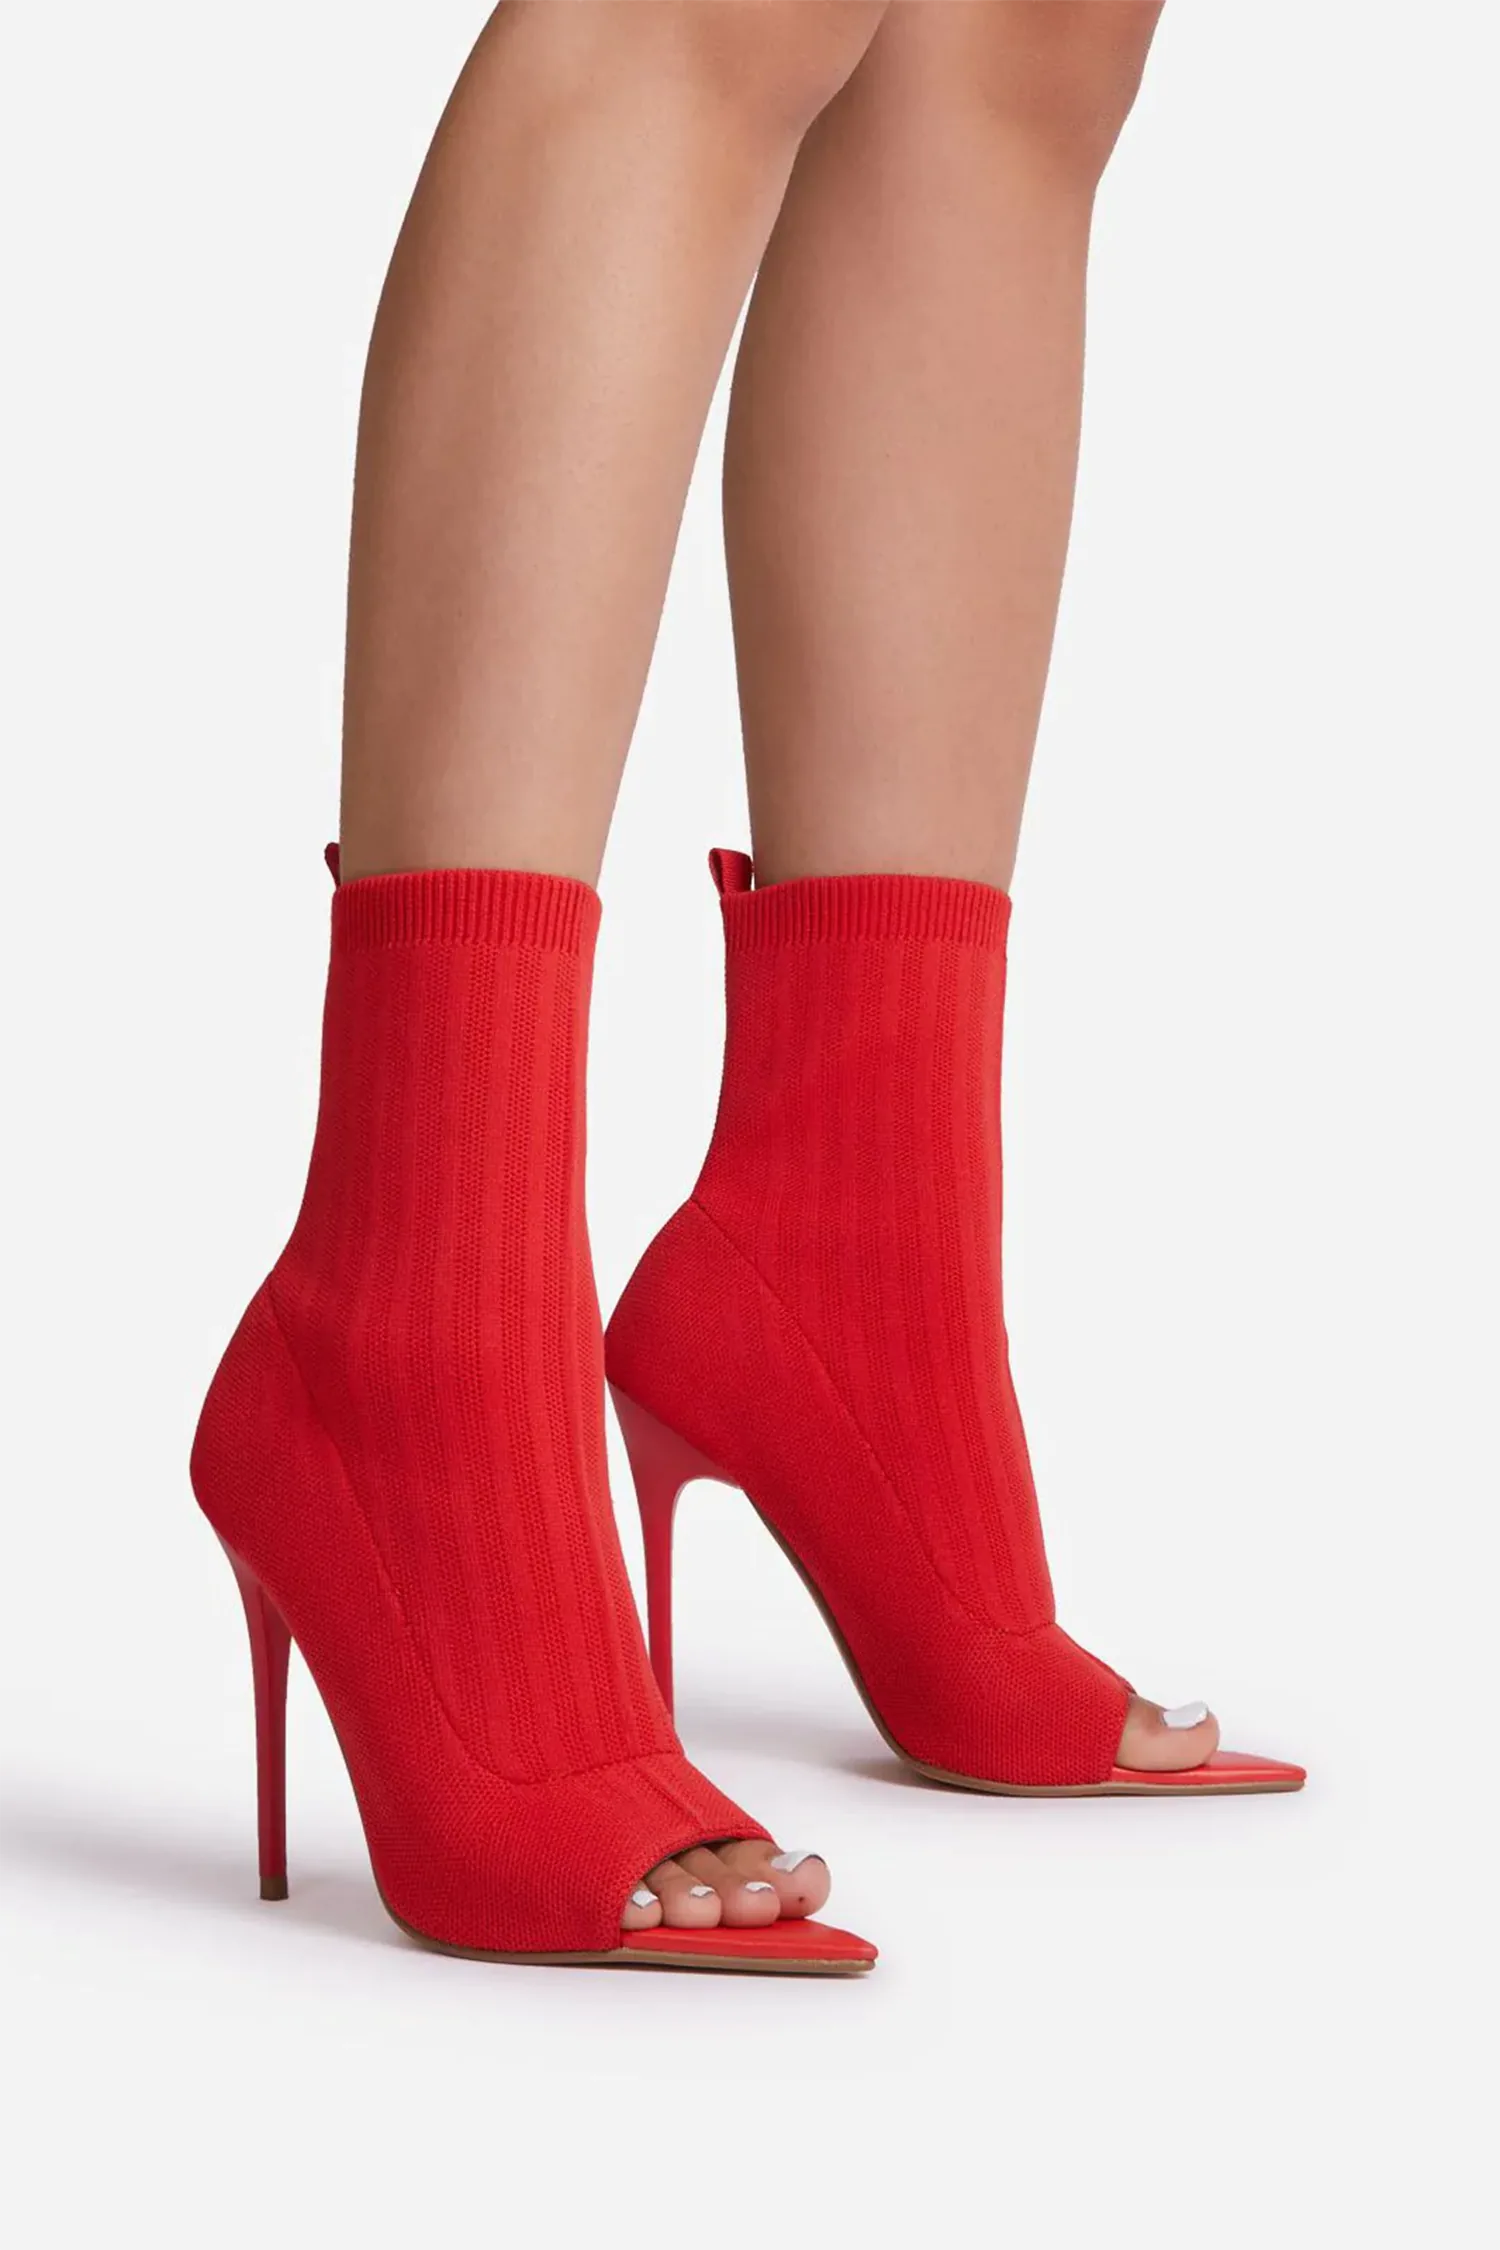 Red Pointed Peep Toe Stiletto Heels Ankle Sock Boots